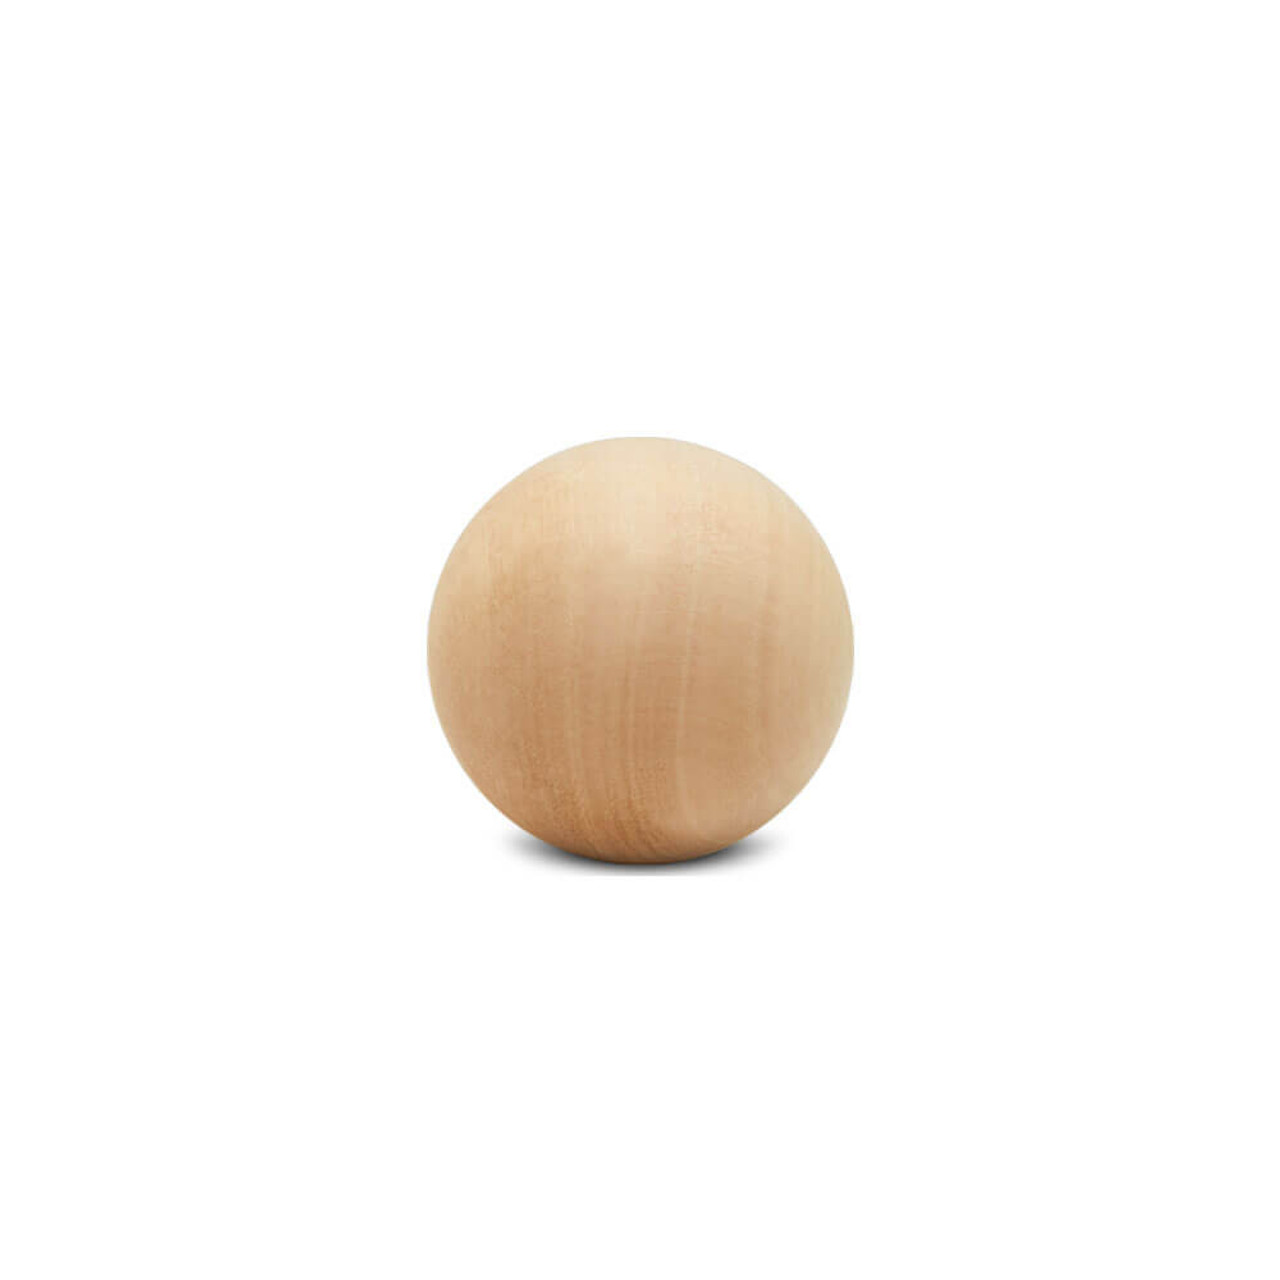 3-1/2 inch Round Wooden Balls for Crafts Bag of 3 Unfinished and